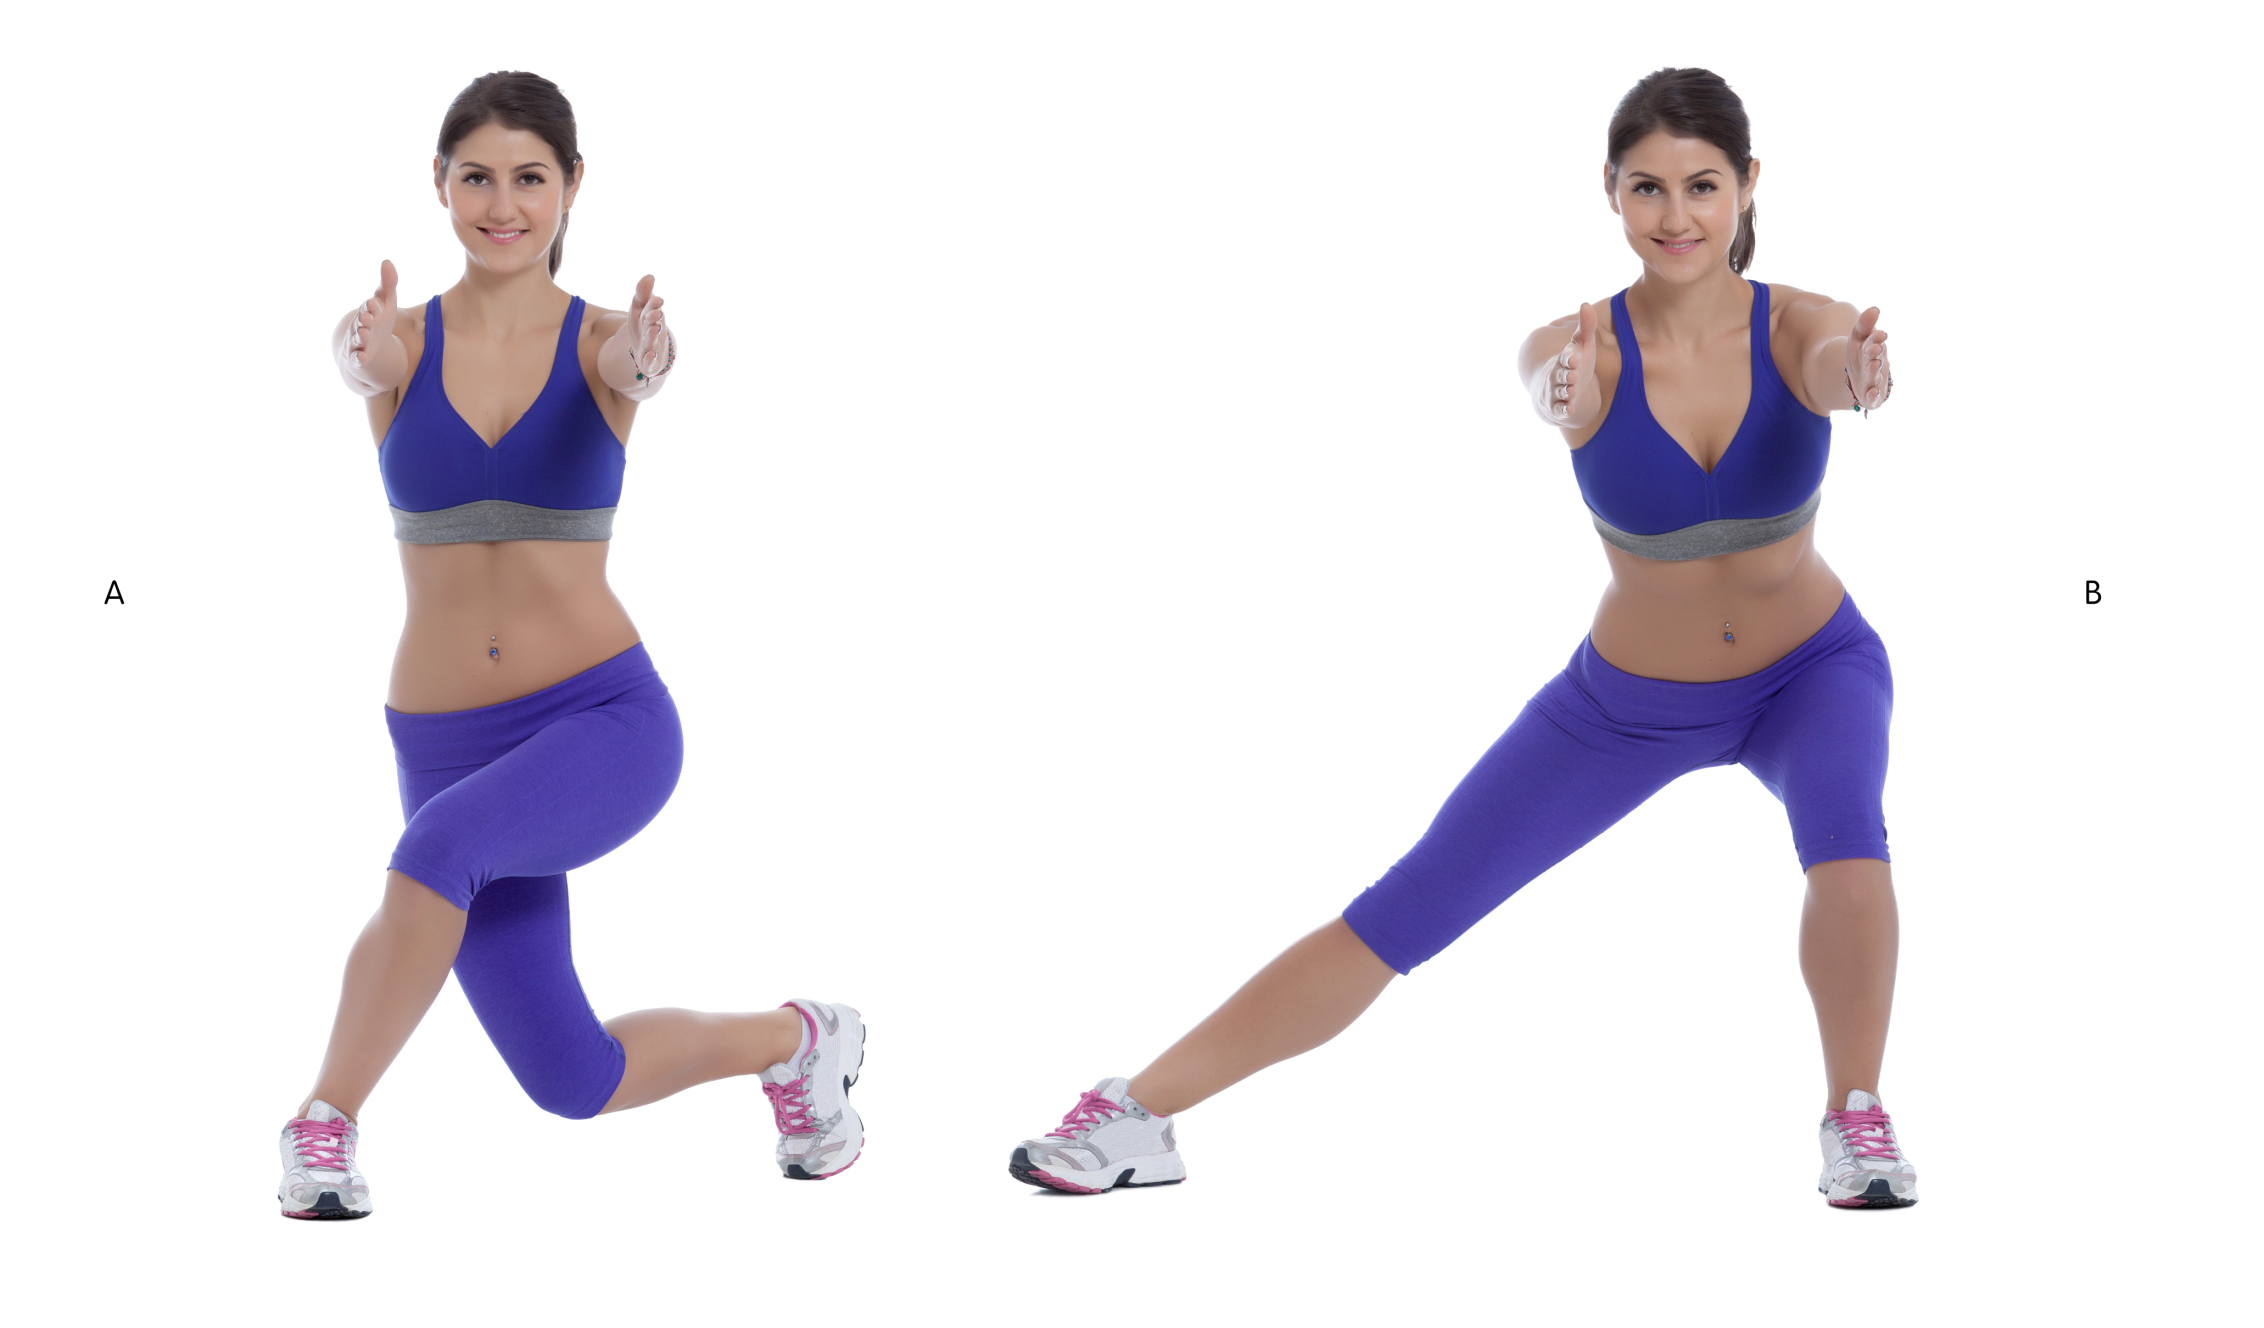 Make This One Change to Your Workout to Tighten Your Butt and Tone